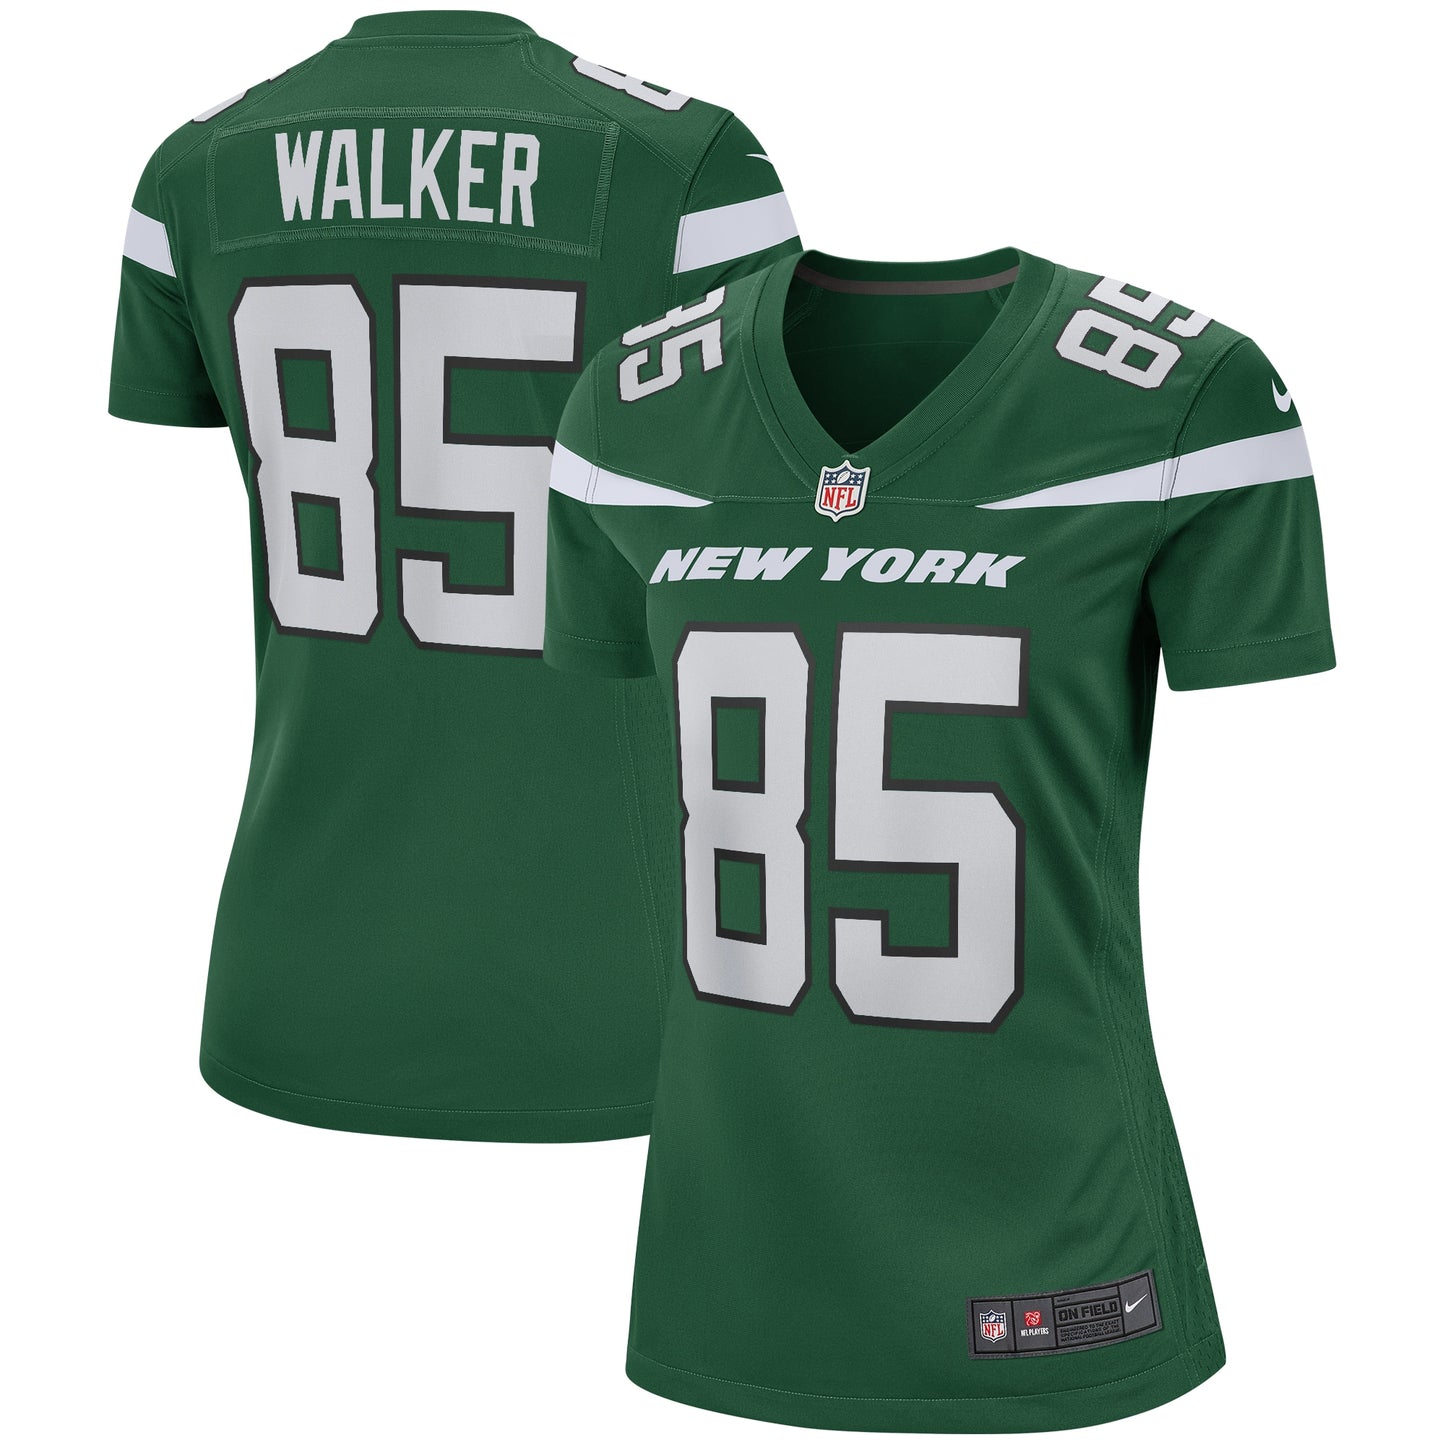 Wesley Walker New York Jets Nike Women's Game Retired Player Jersey - Green